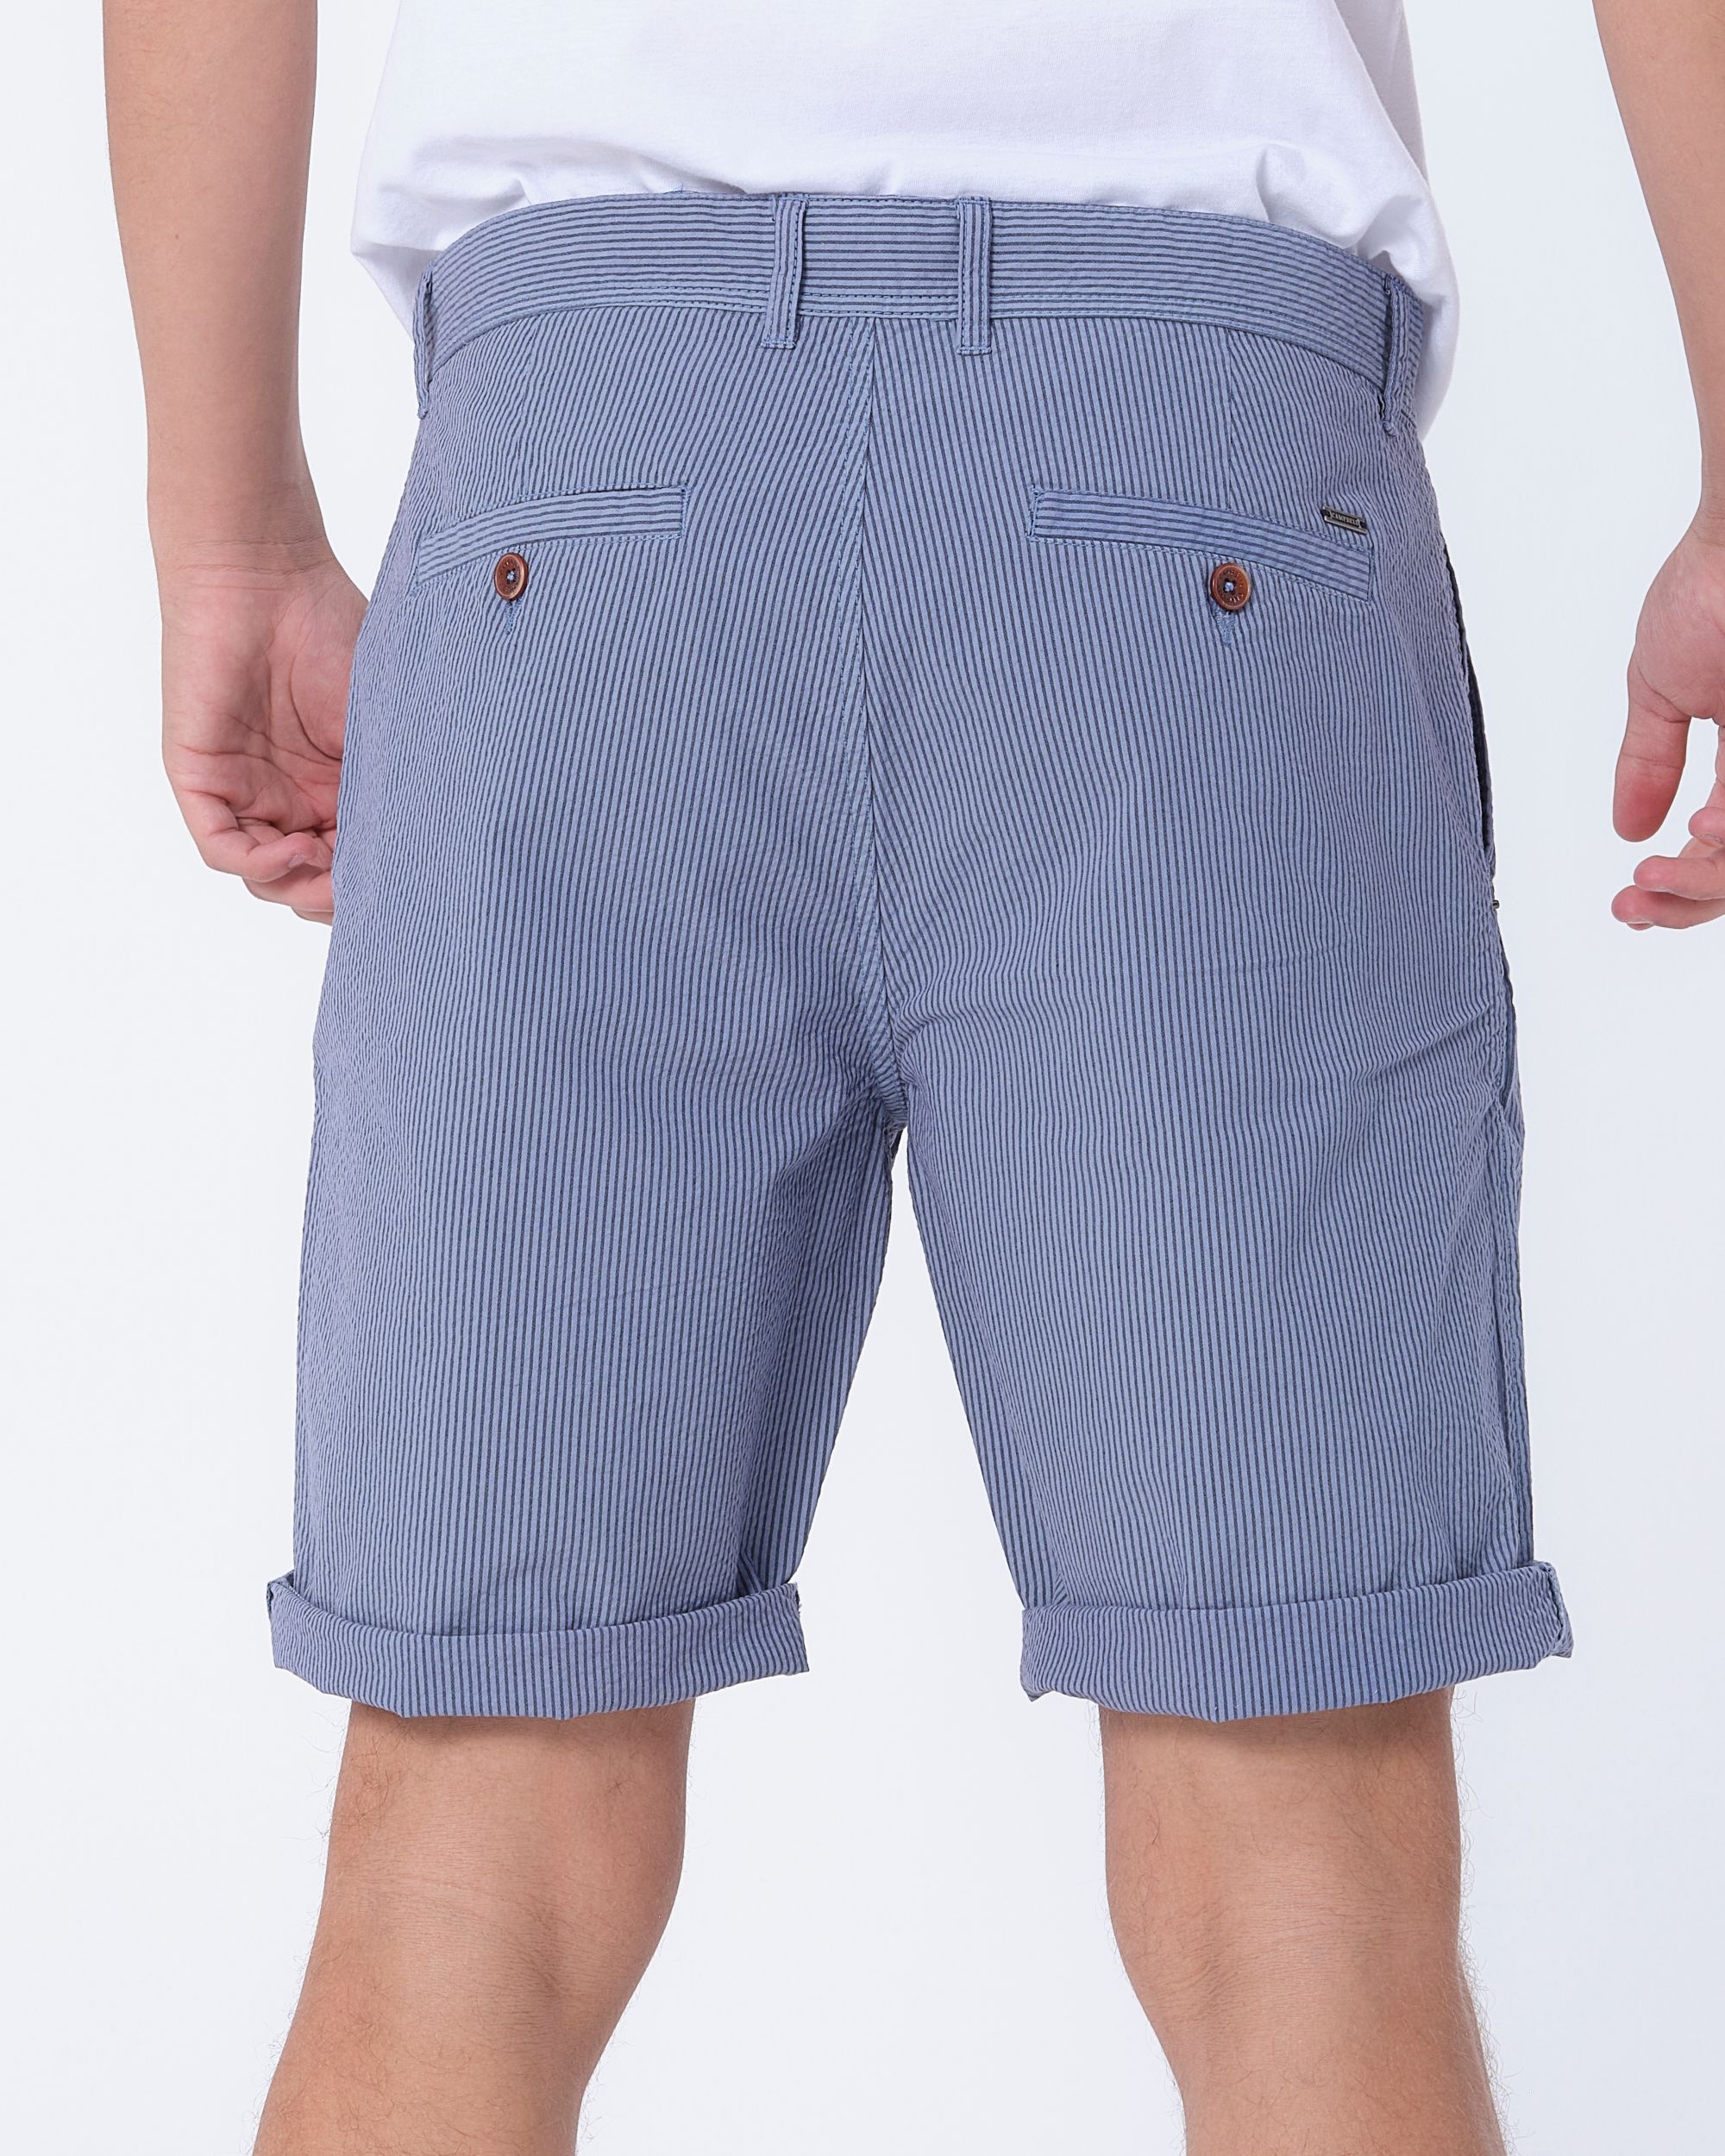 Campbell Classic Short Country Blue stripe 088390-002-30